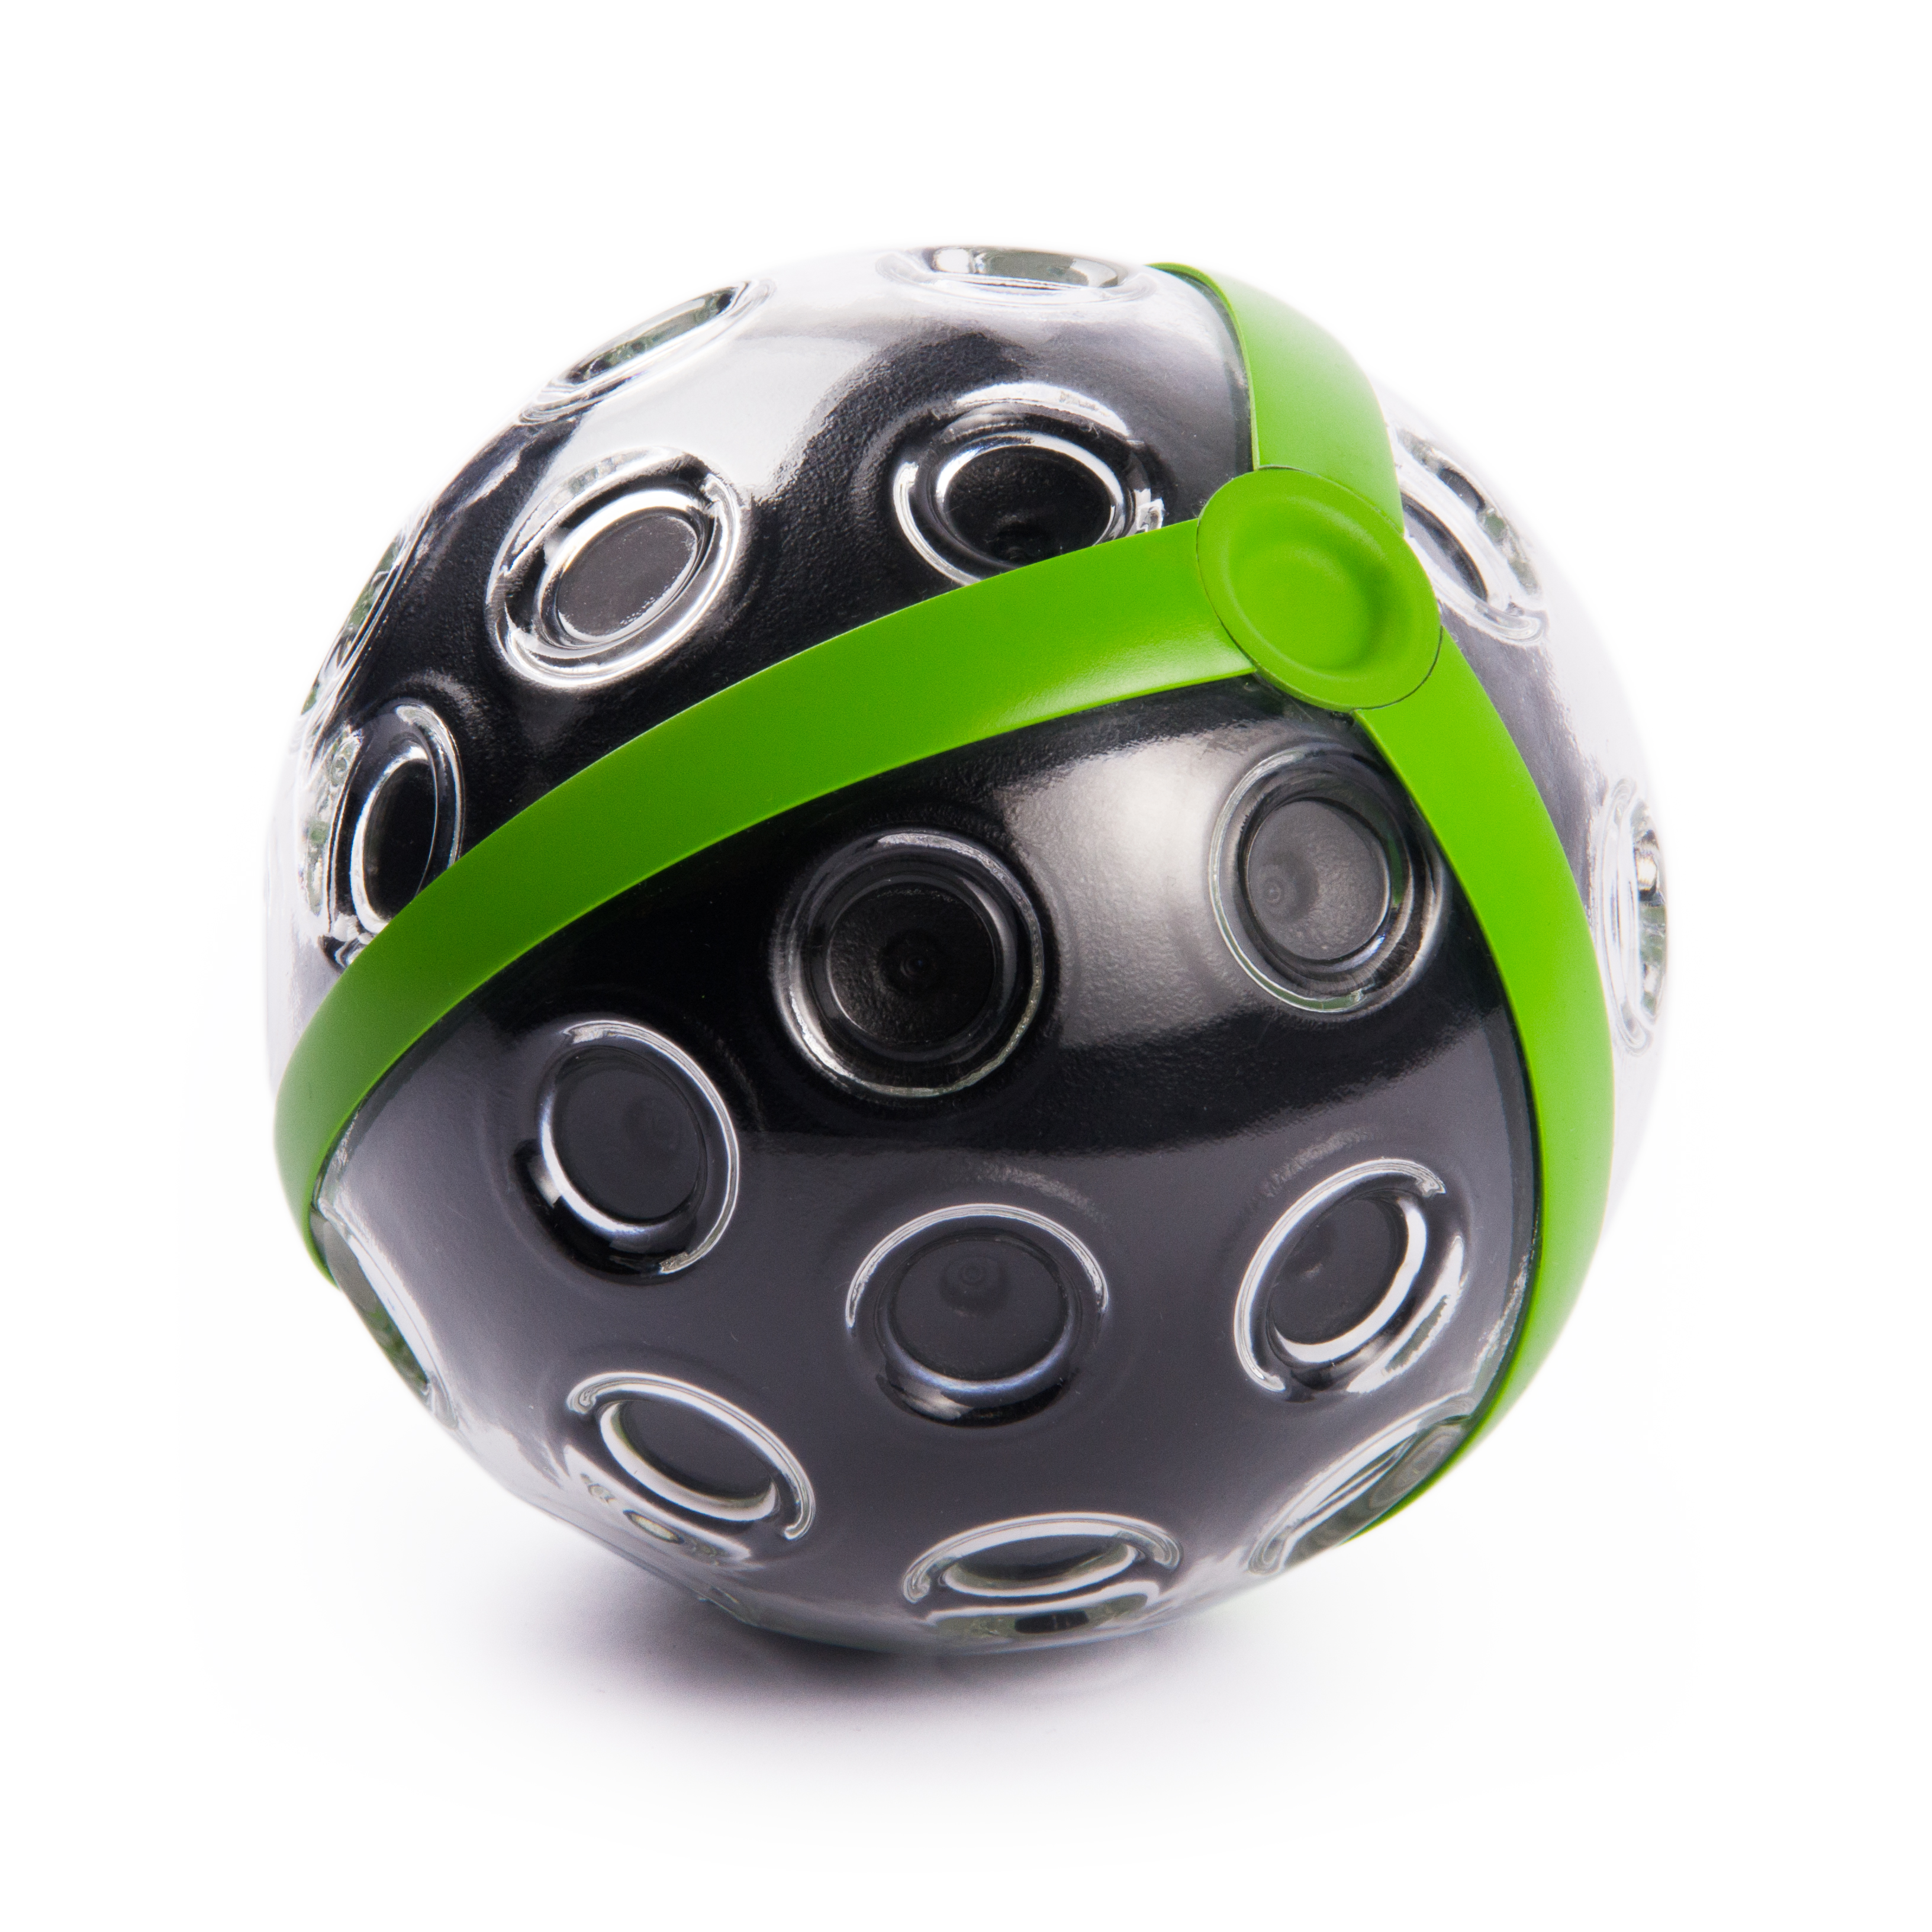 Panono cameras come in both green and black, and have a diameter of just 4.33 inches.